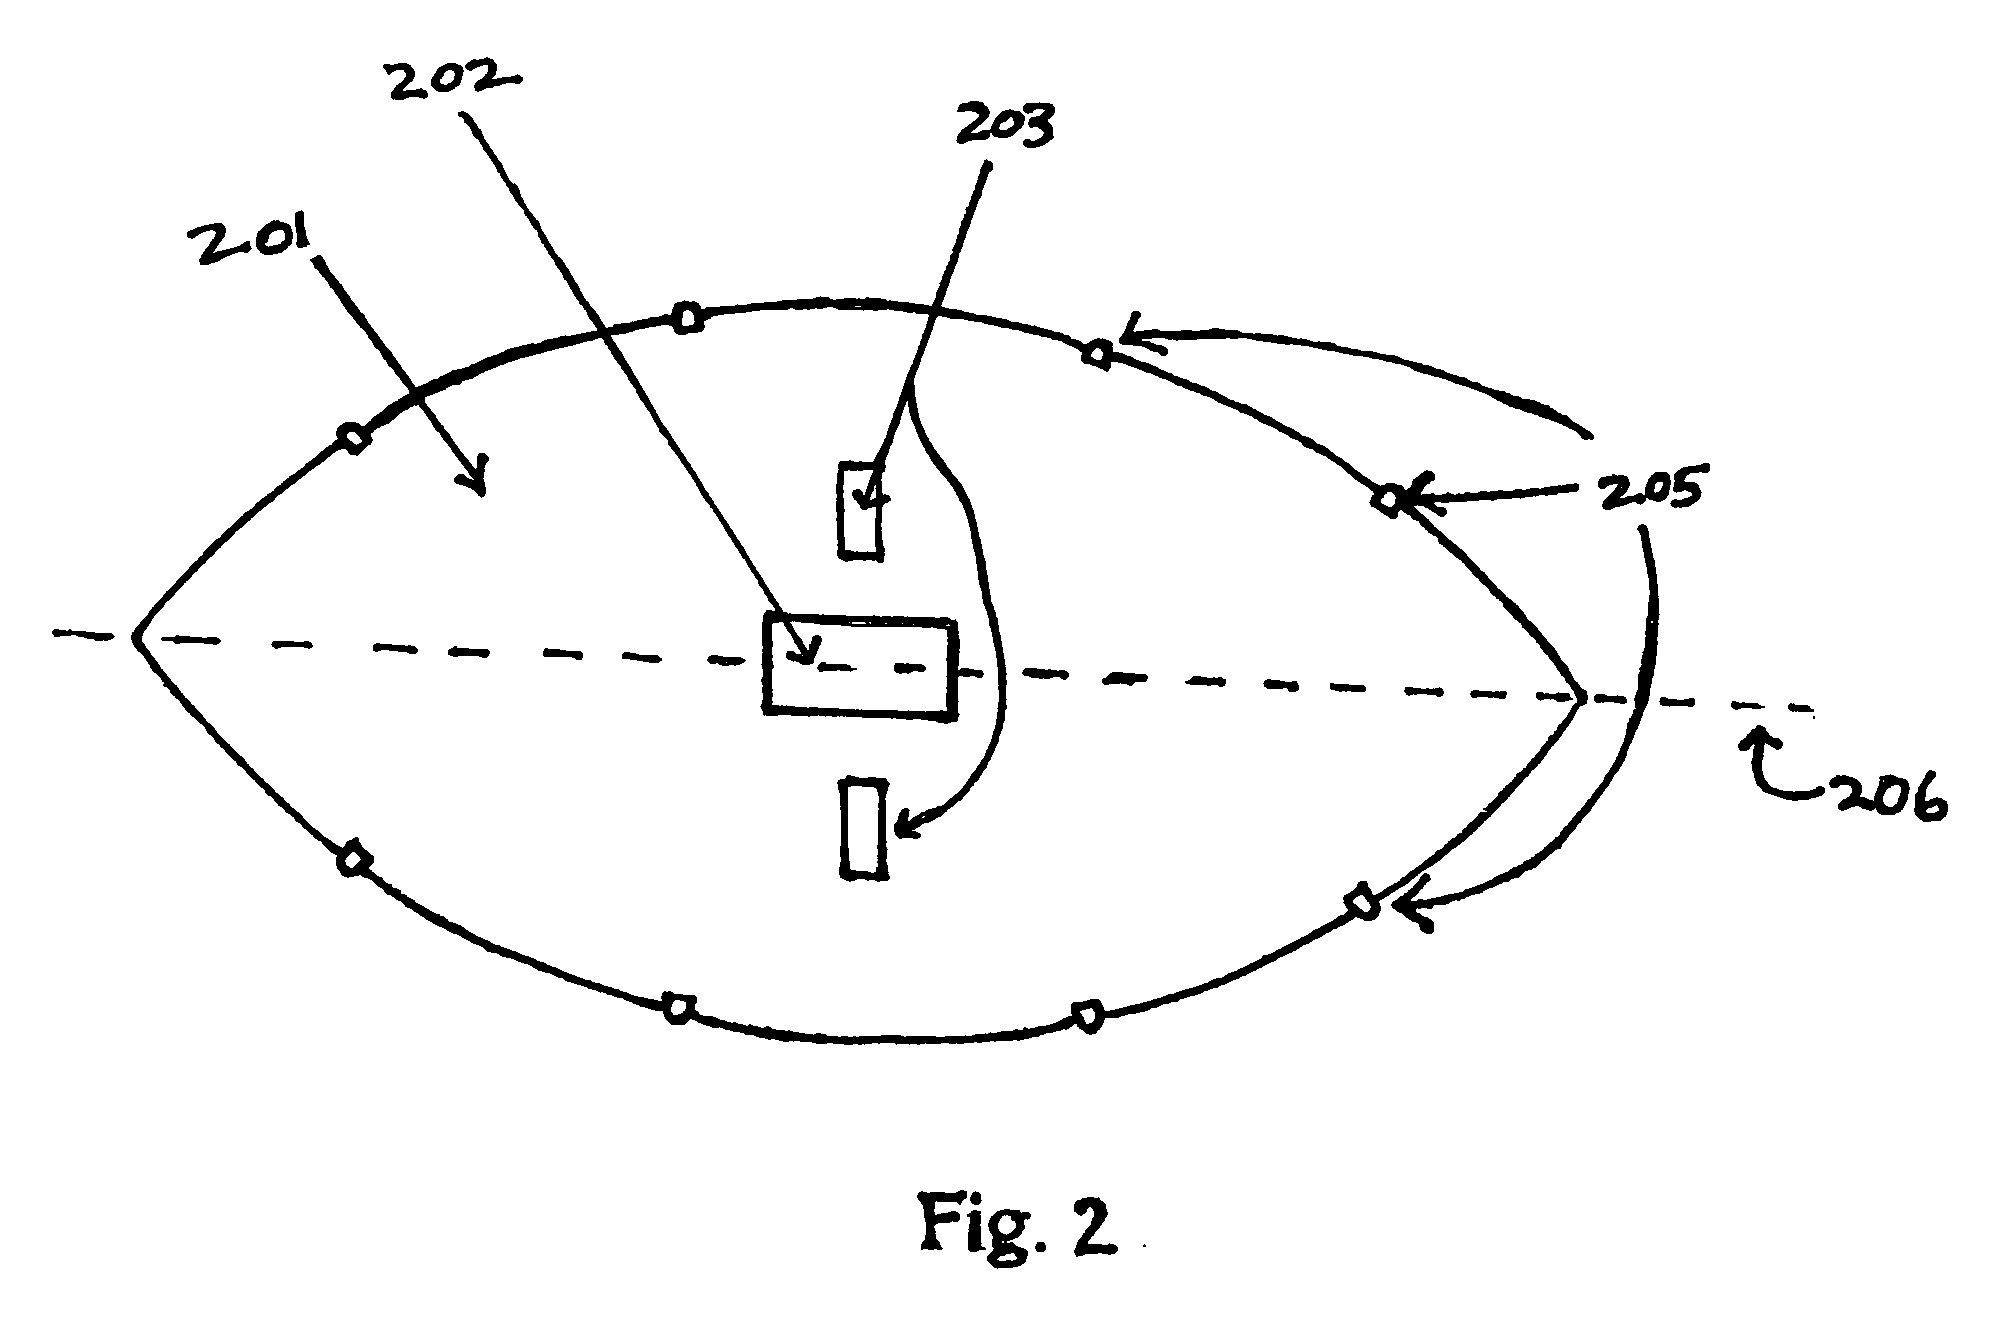 False activation reducing centrifugal activation system